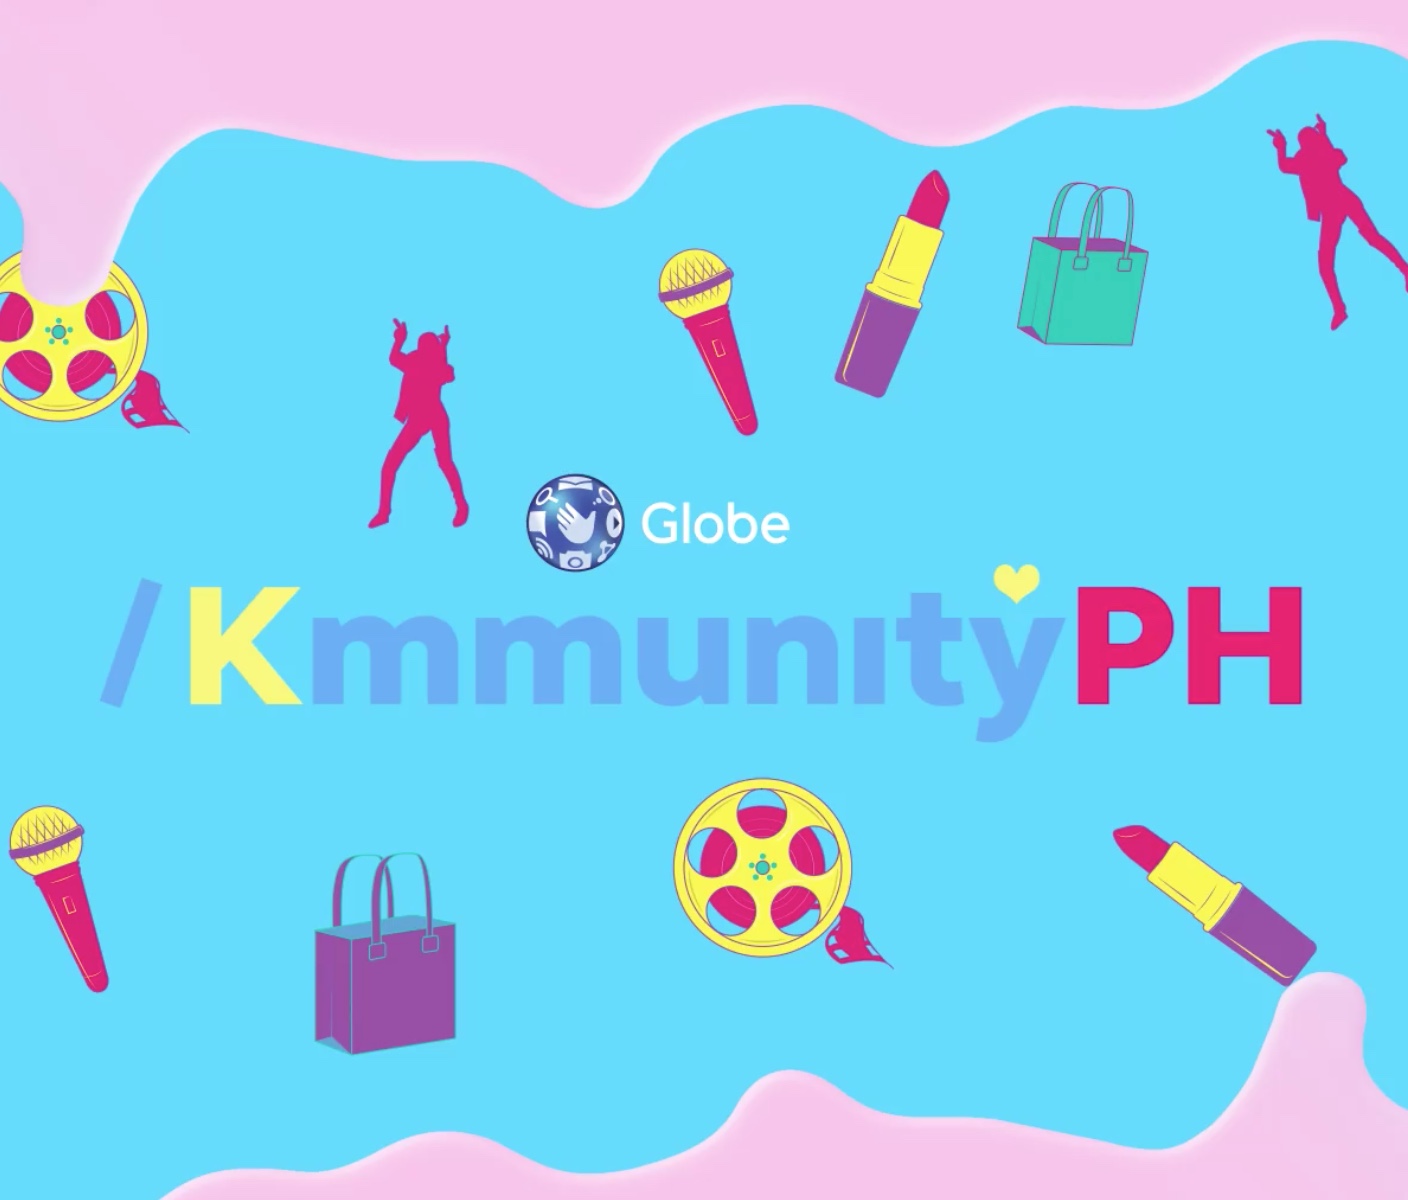 Globe Kmmunity PH launched new channels and exclusive partnerships for K-Pop Pinoy fans